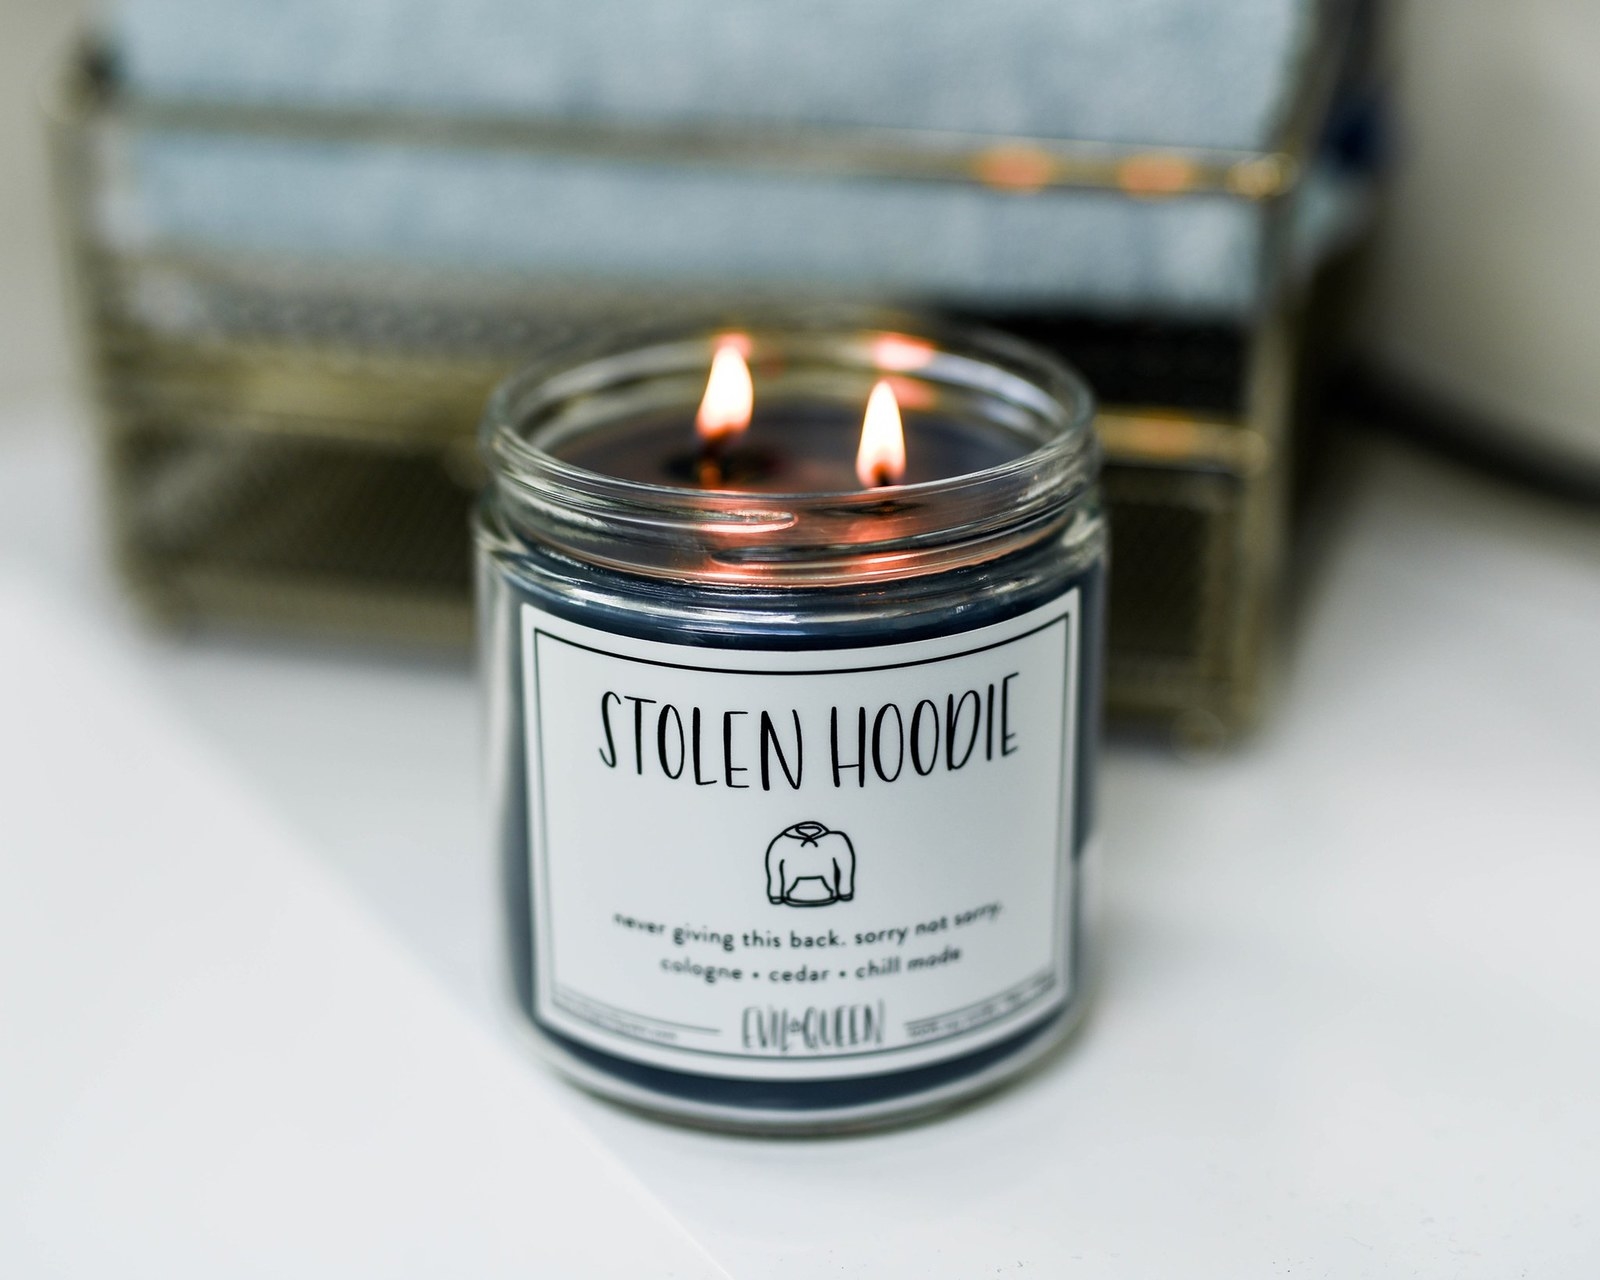 a candle with a label that says &quot;stolen hood, never giving this back, sorry not sorry&quot; on it